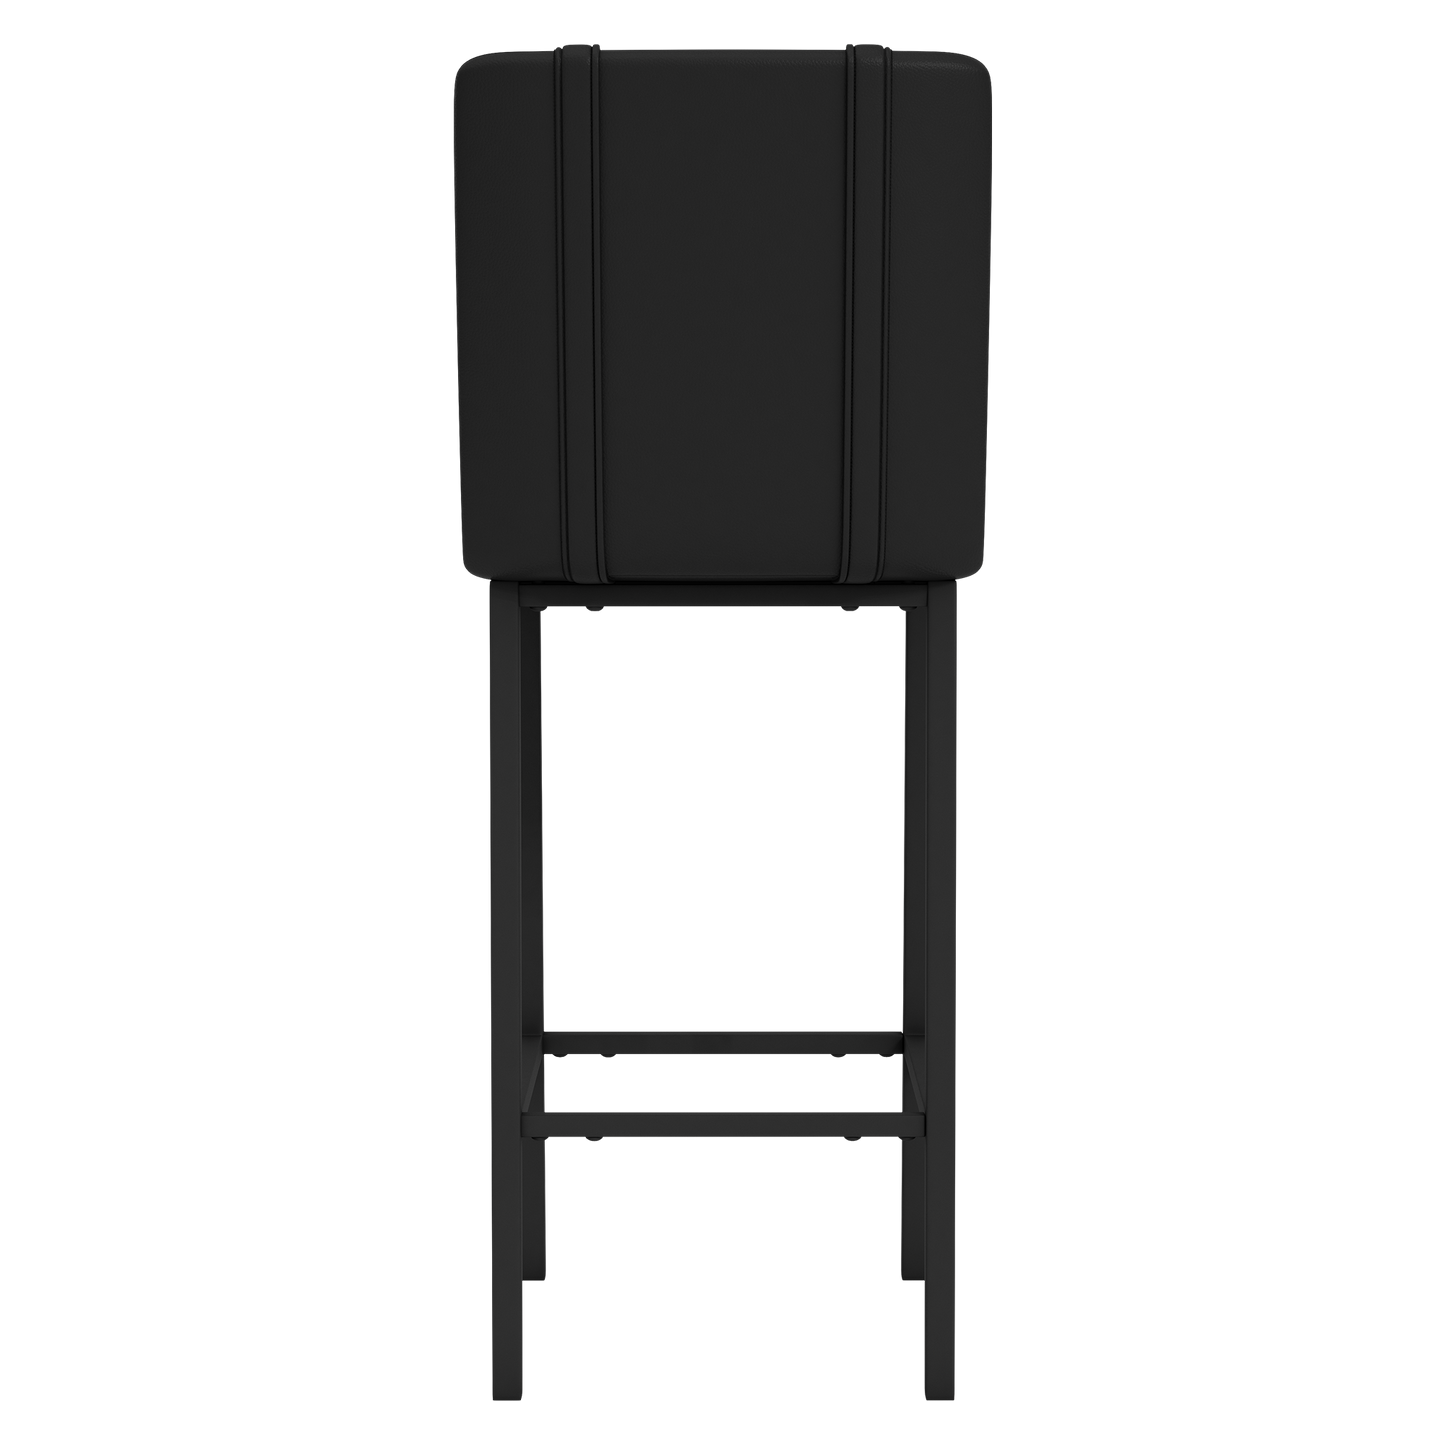 Bar Stool 500 with Los Angeles Lakers Logo Set of 2